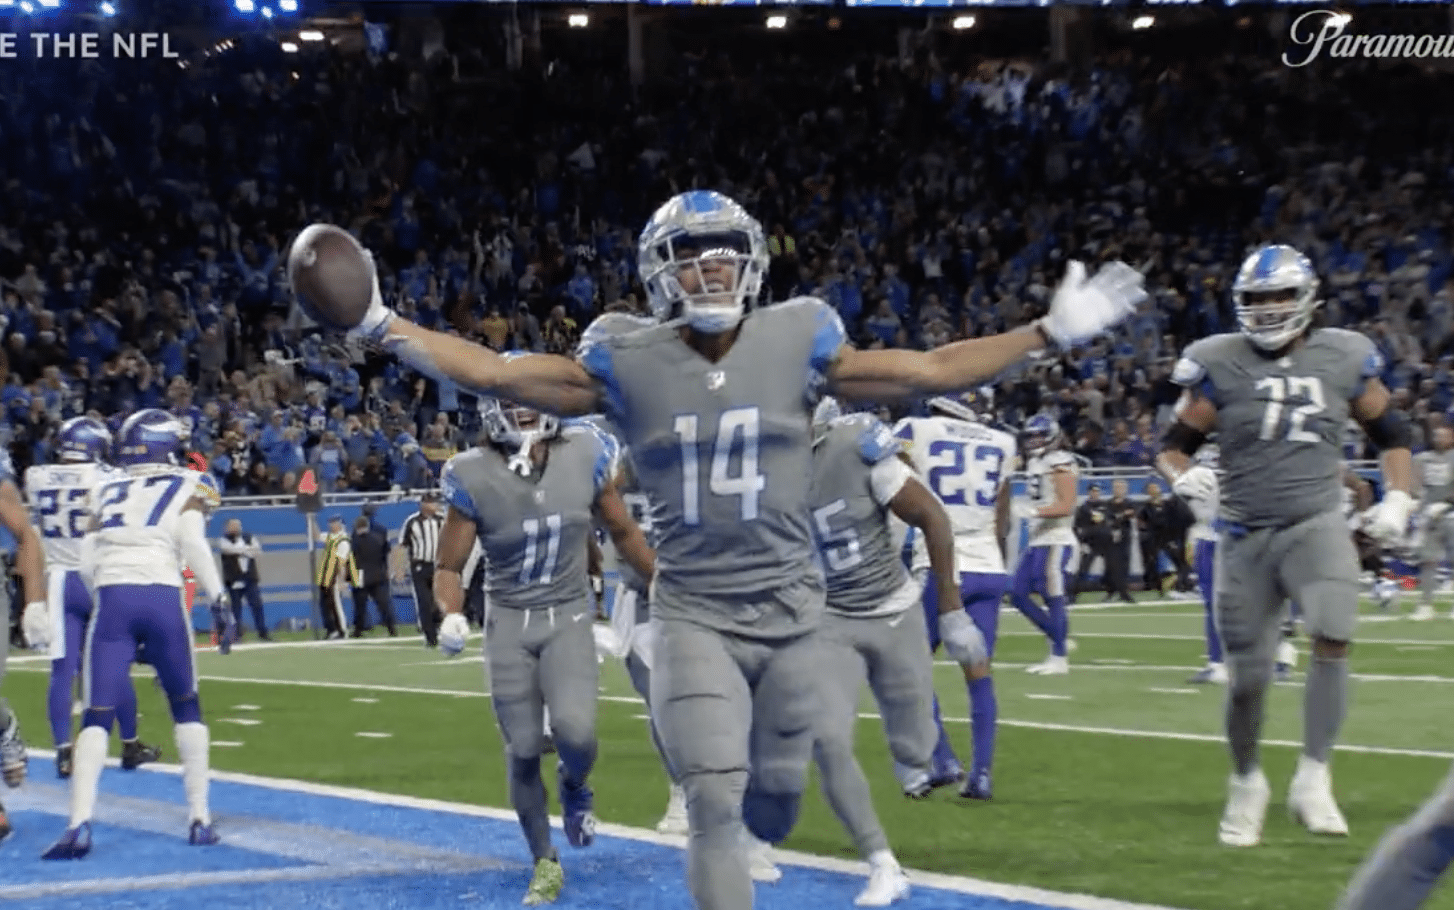 Amon-Ra St. Brown 2023 Detroit Lions Jared Goff Detroit Lions PFF Grades What Detroit Lions Will Have to Pay Amon-Ra St. Brown